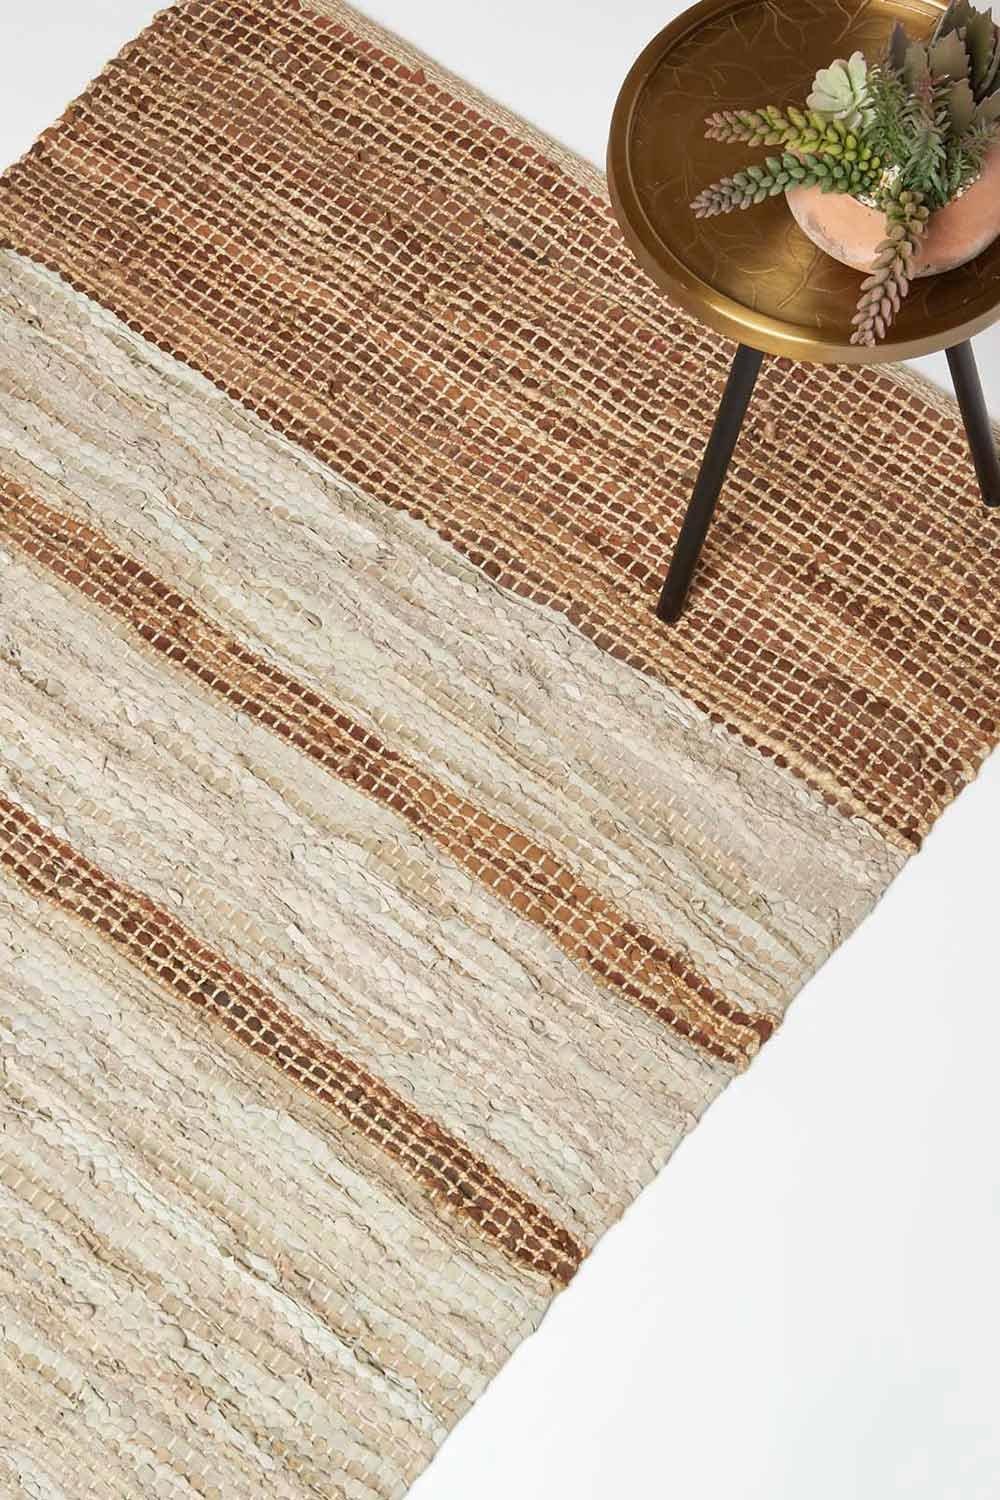 Brown Recycled Leather Handwoven Stripe Rug